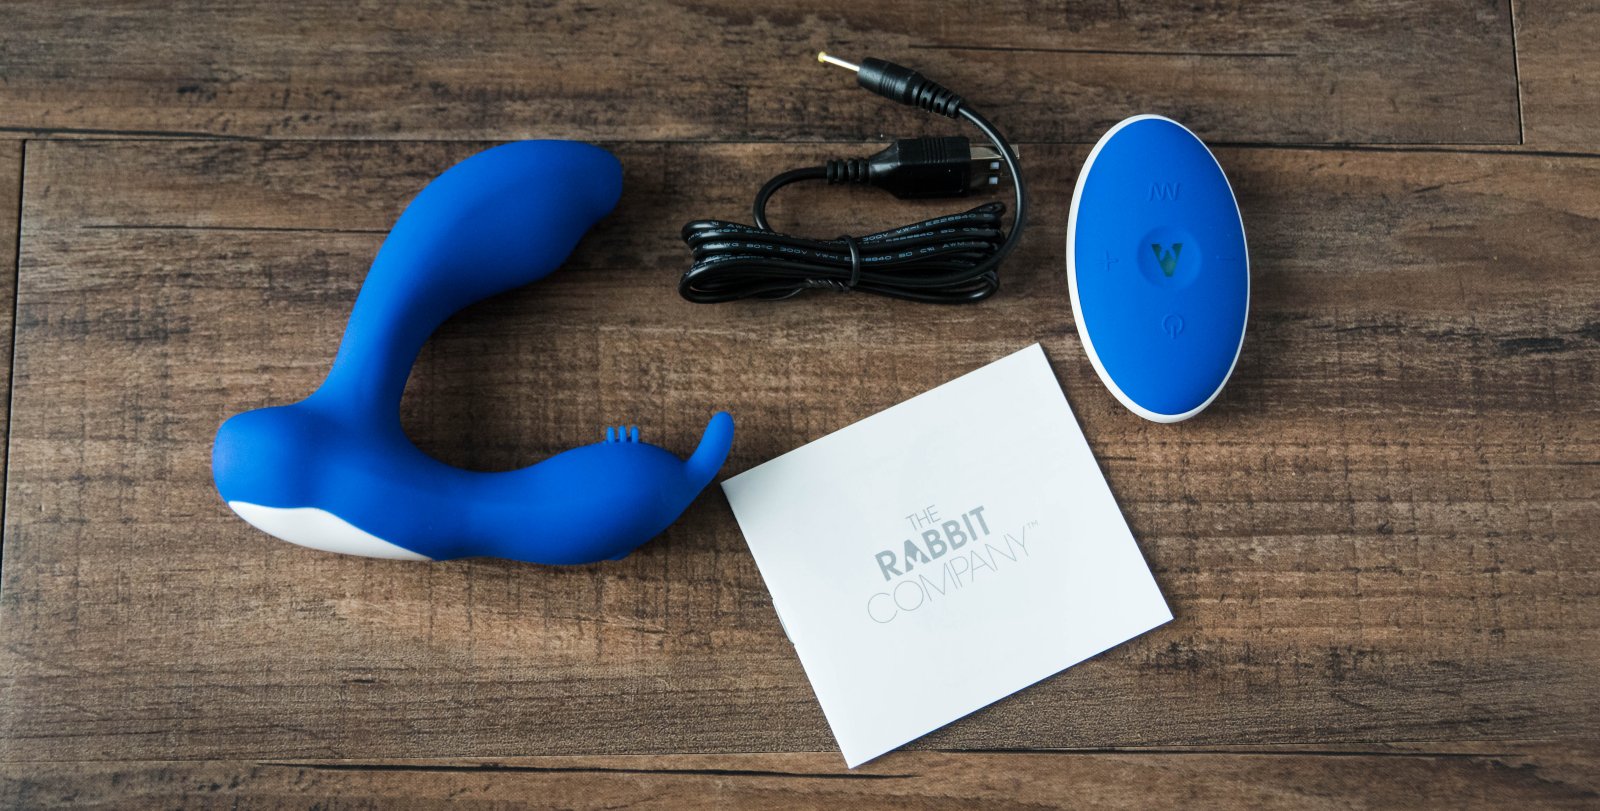 The Rabbit Company Prostate Rabbit Review picture